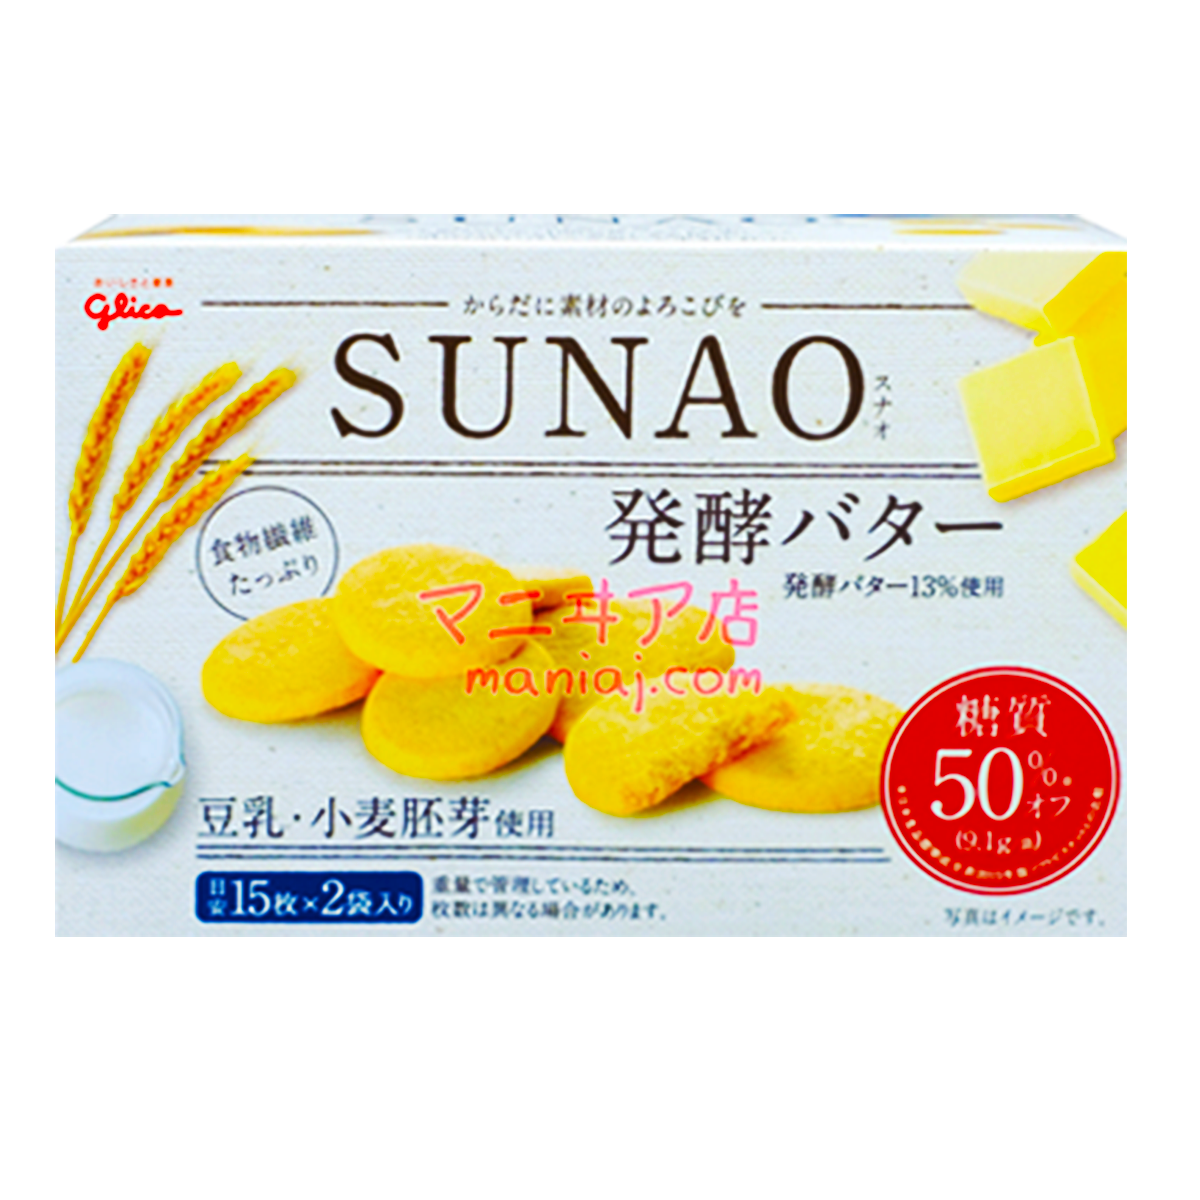 SUNAO Fermented Butter Biscuits